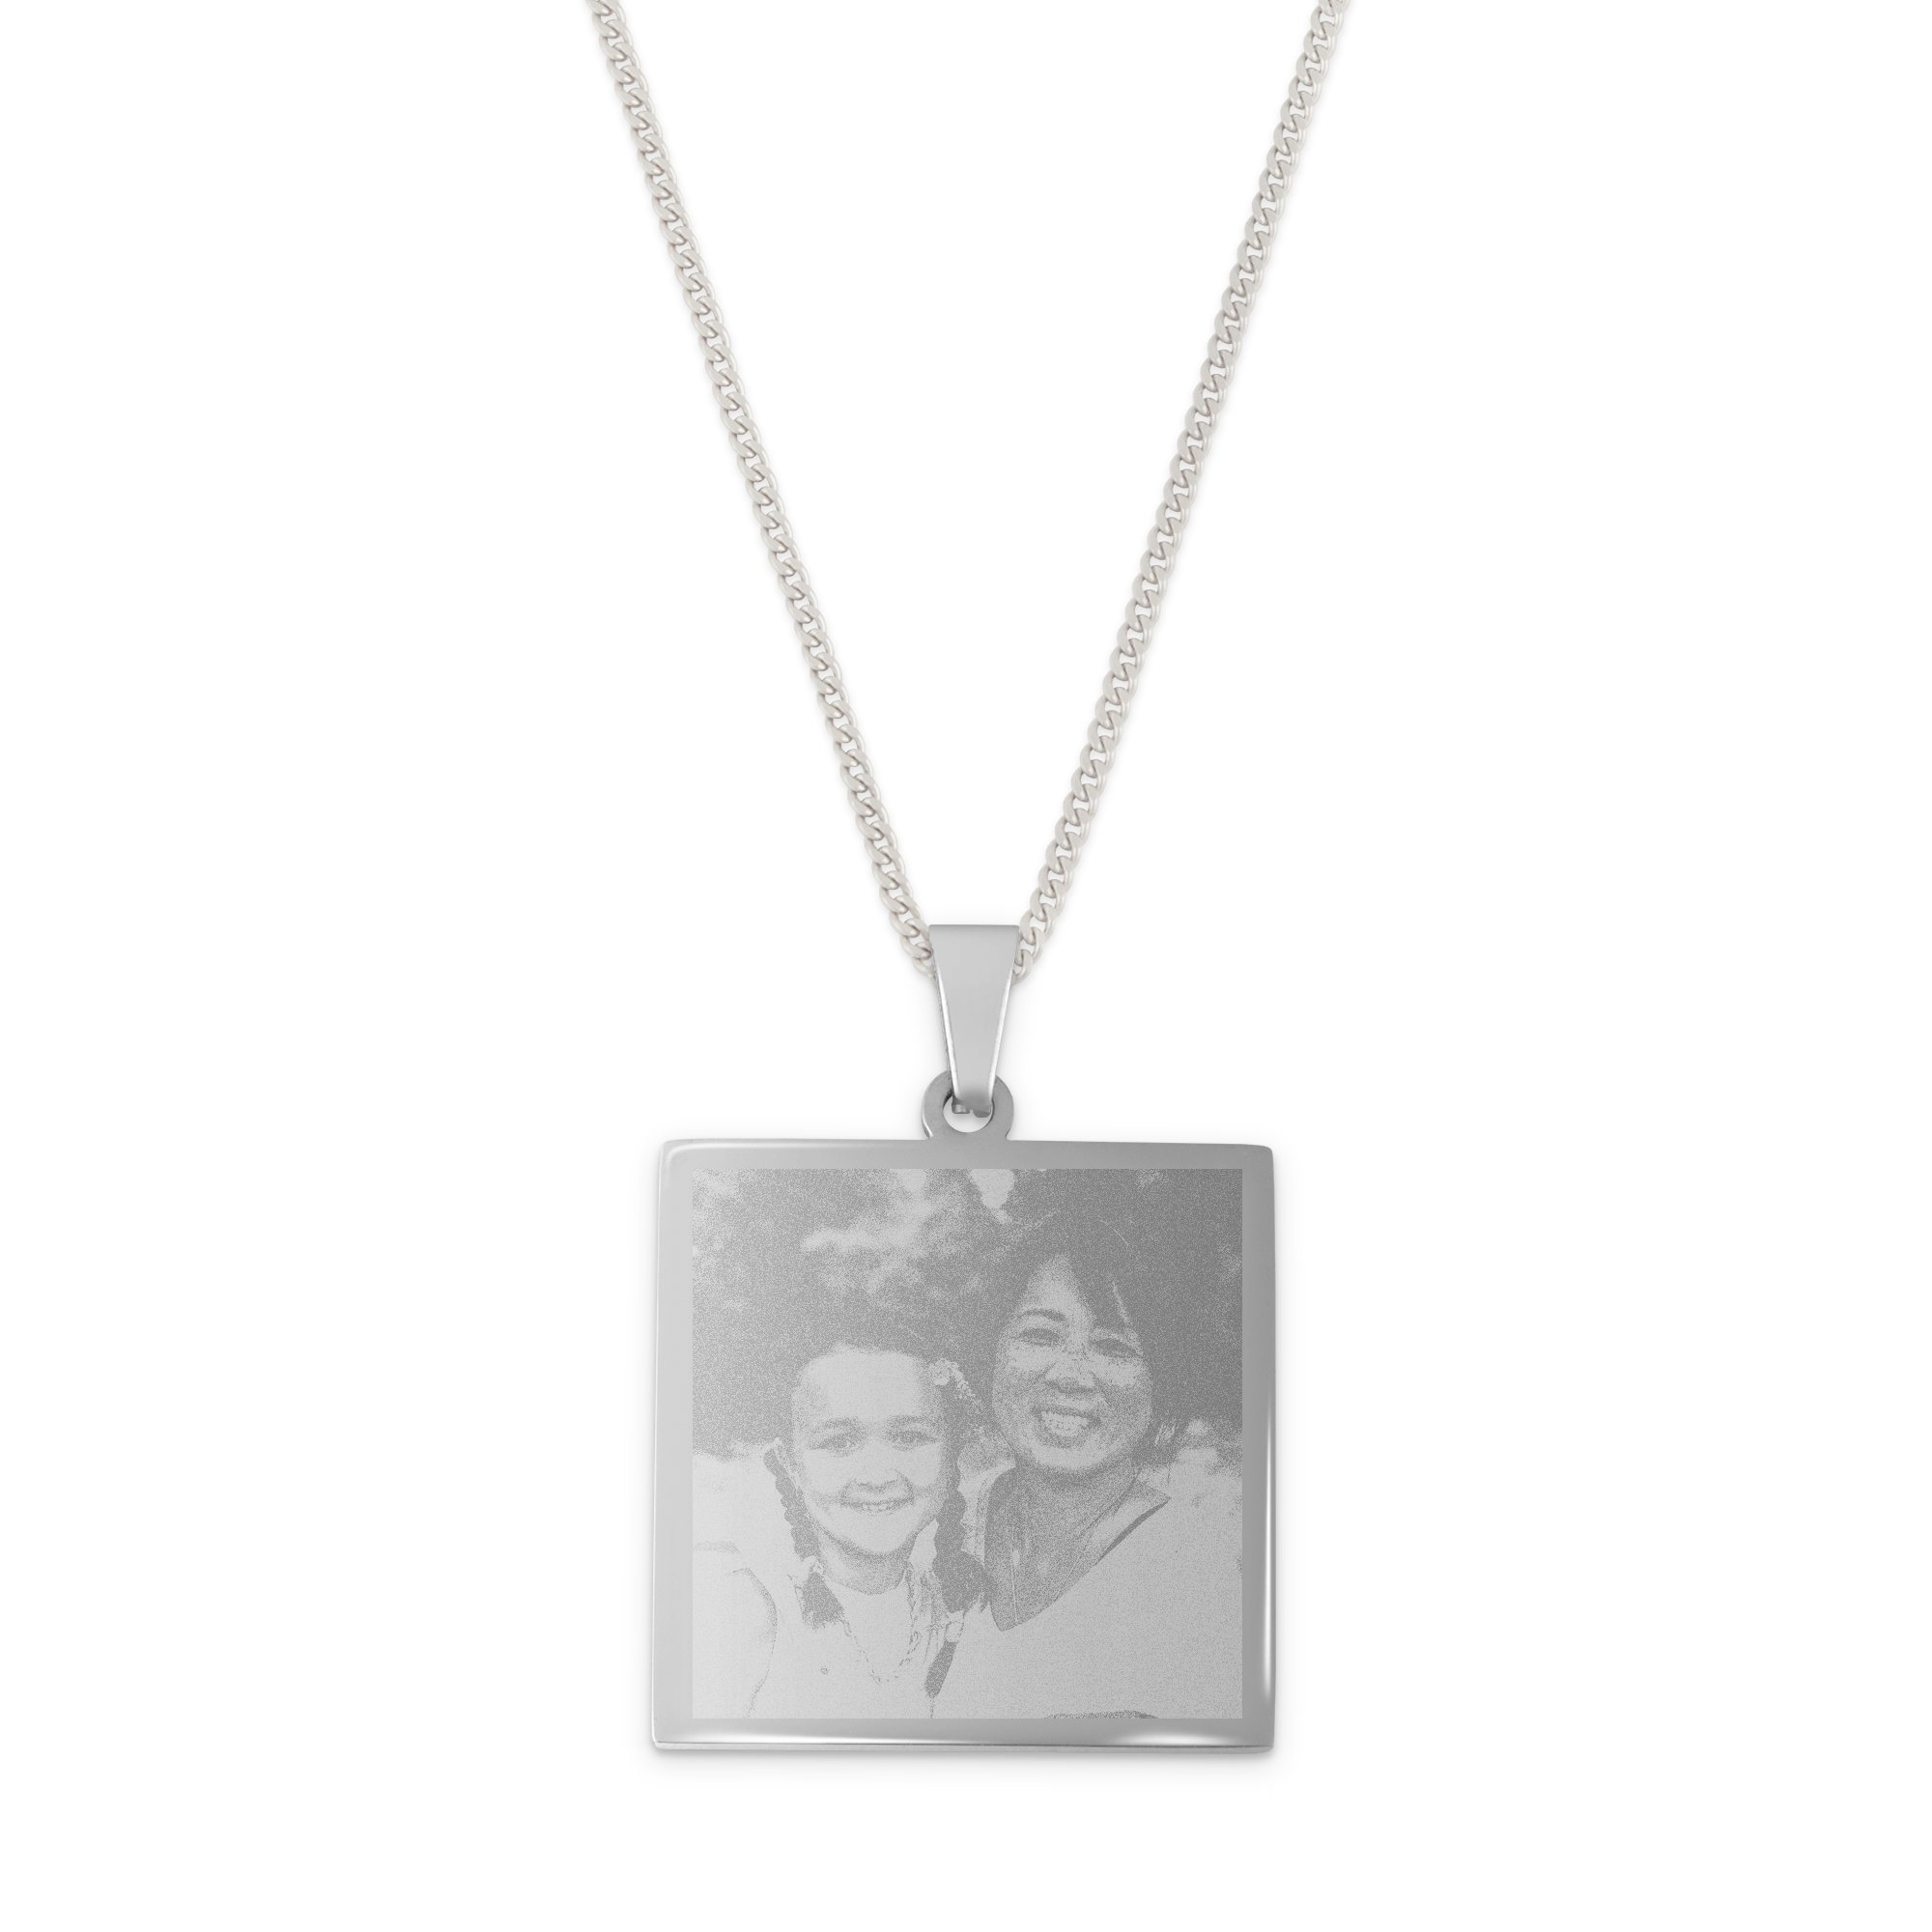 Necklace square pendant with photo - silver